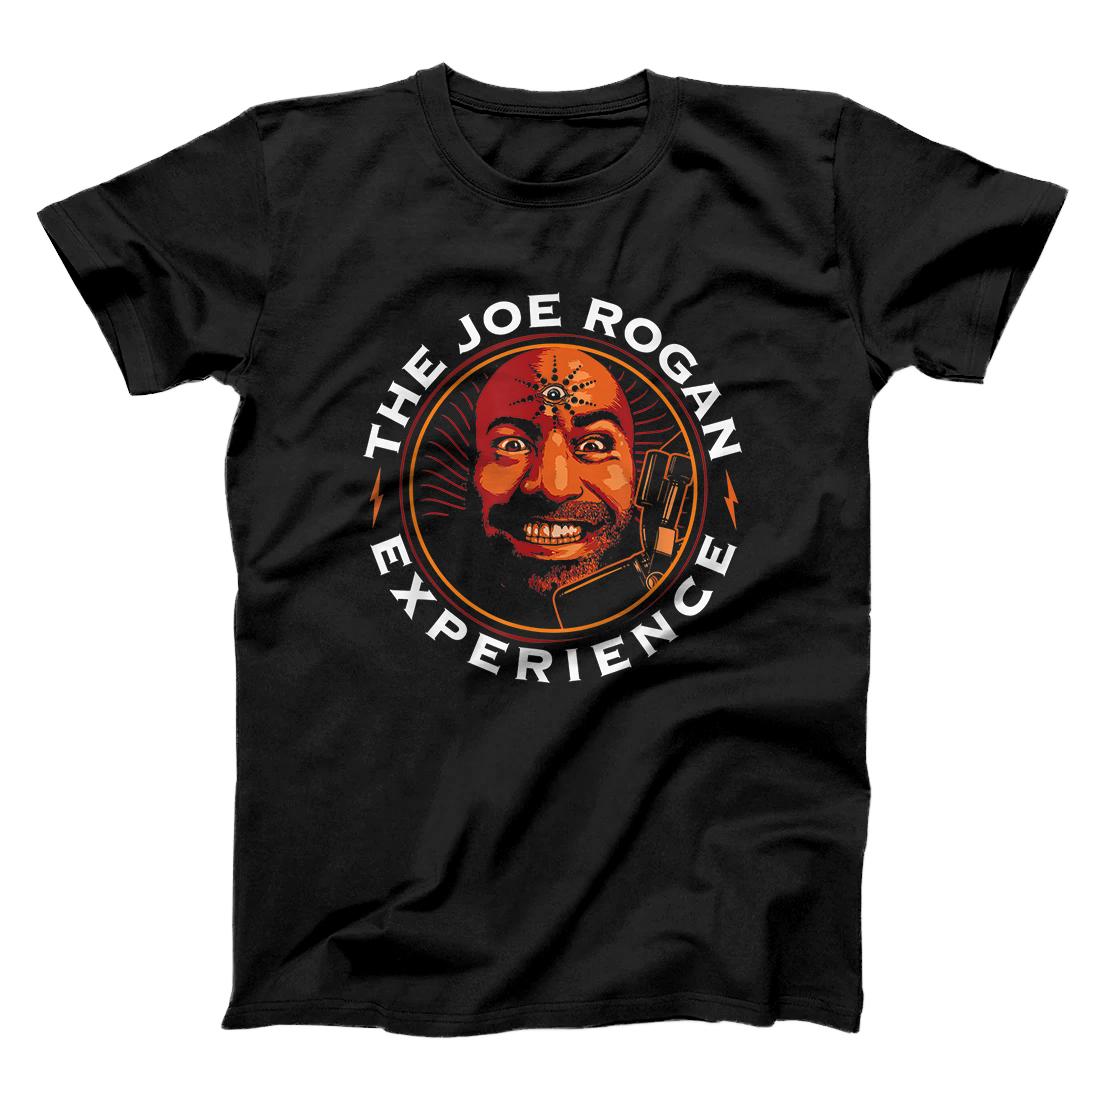 Personalized The-Joes Tees-Rogans Experiences-TShirts T-Shirt